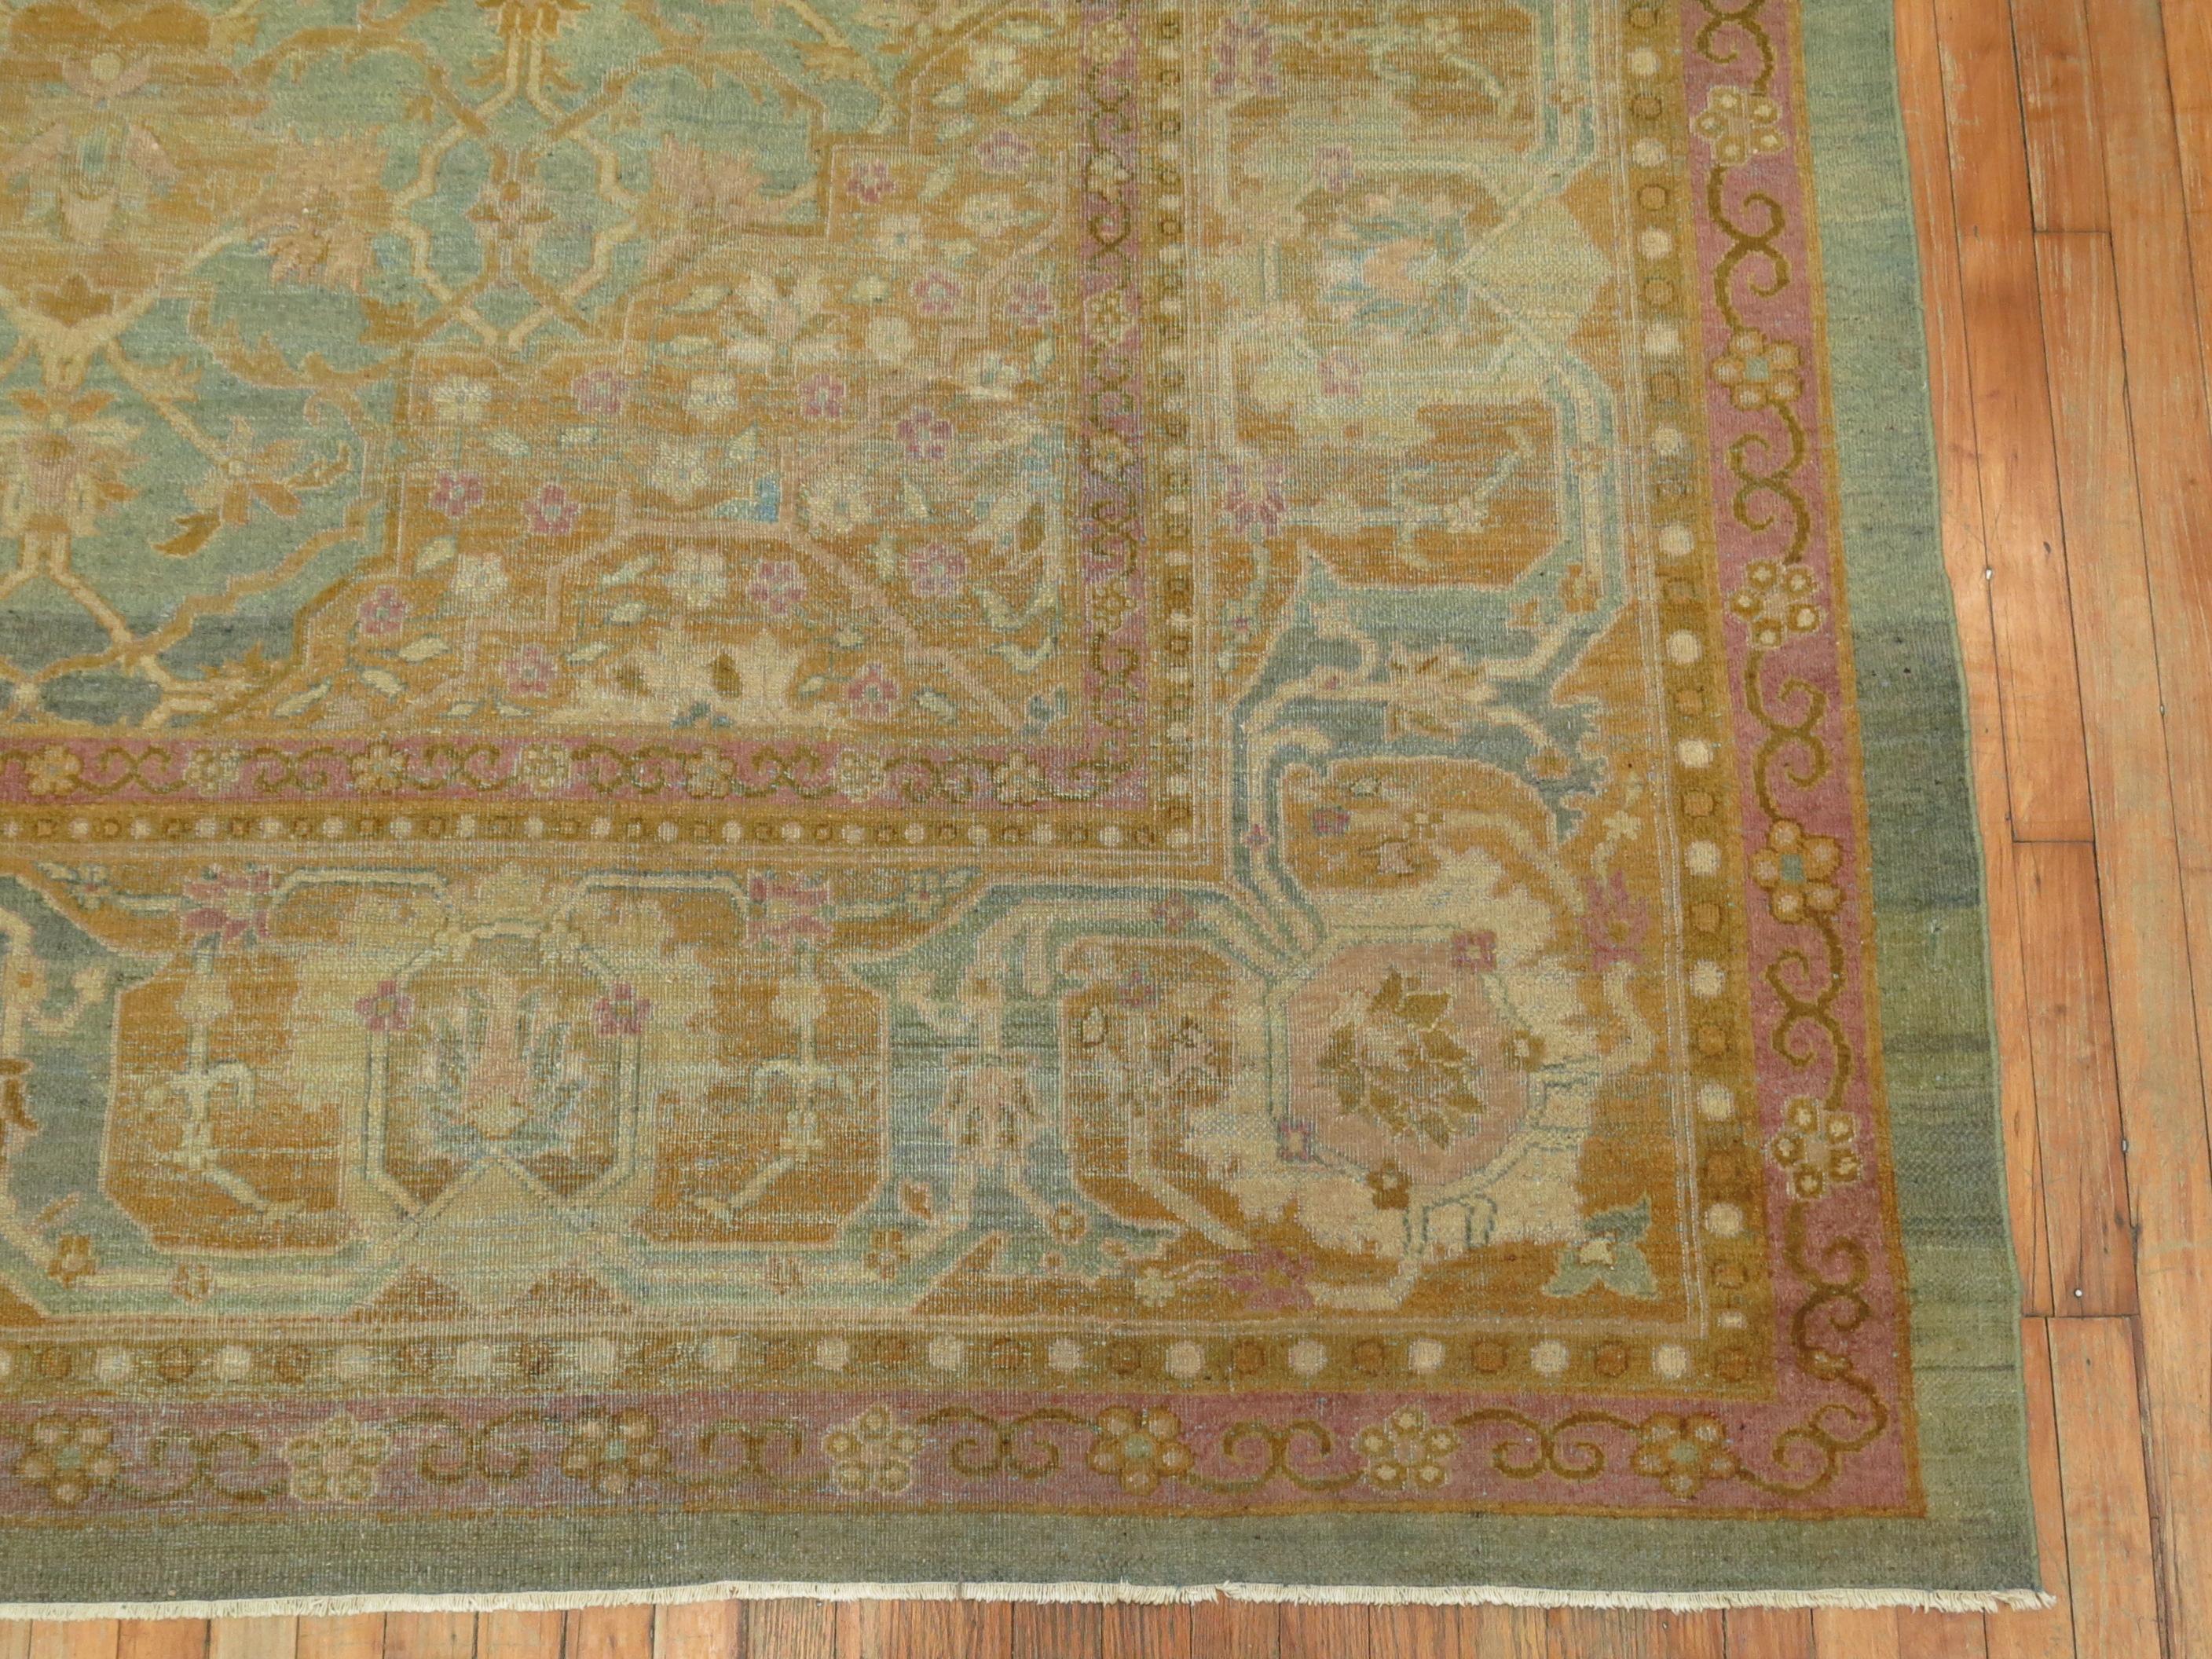 Hand-Woven Turquoise Pink Antique Indian Amritsar Room Rug For Sale